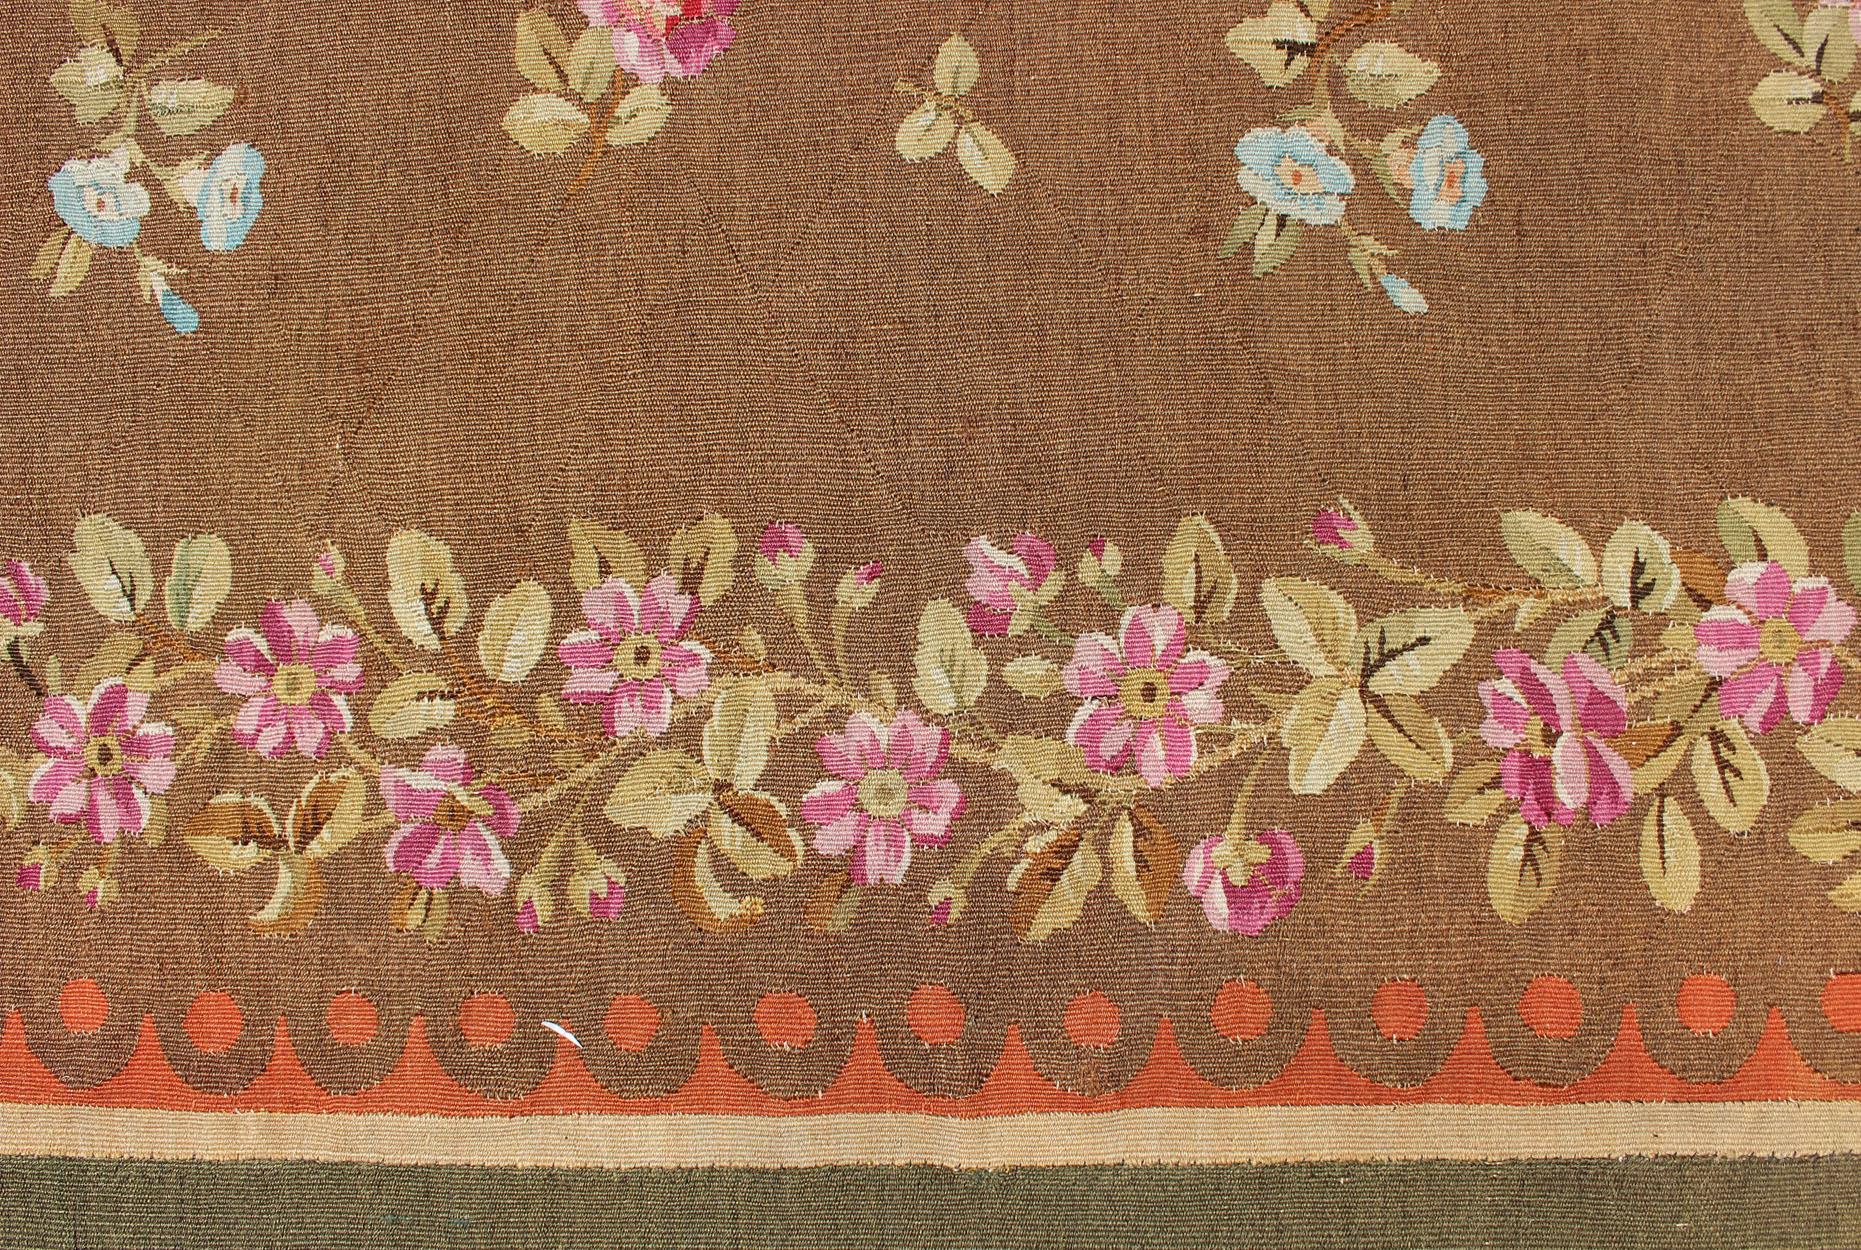 Antique European French Aubusson Rug with Rosset and Floral Design in Brown 2